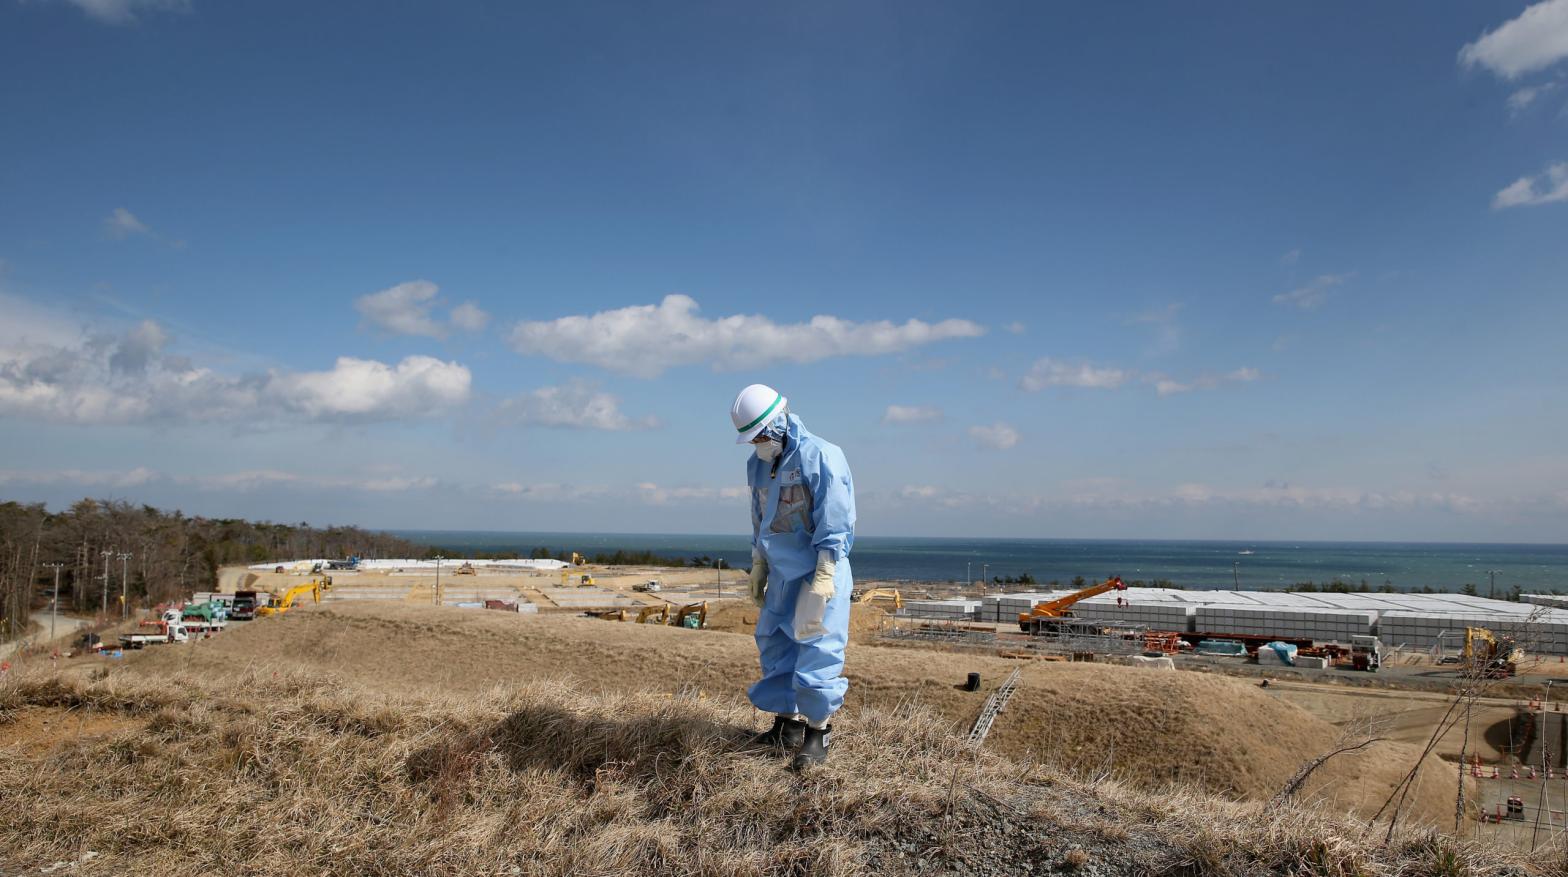 A TEPCO employee works at Fukushima Daiichi nuclear power plant in 2016. (Photo: Christopher Furlong, Getty Images)